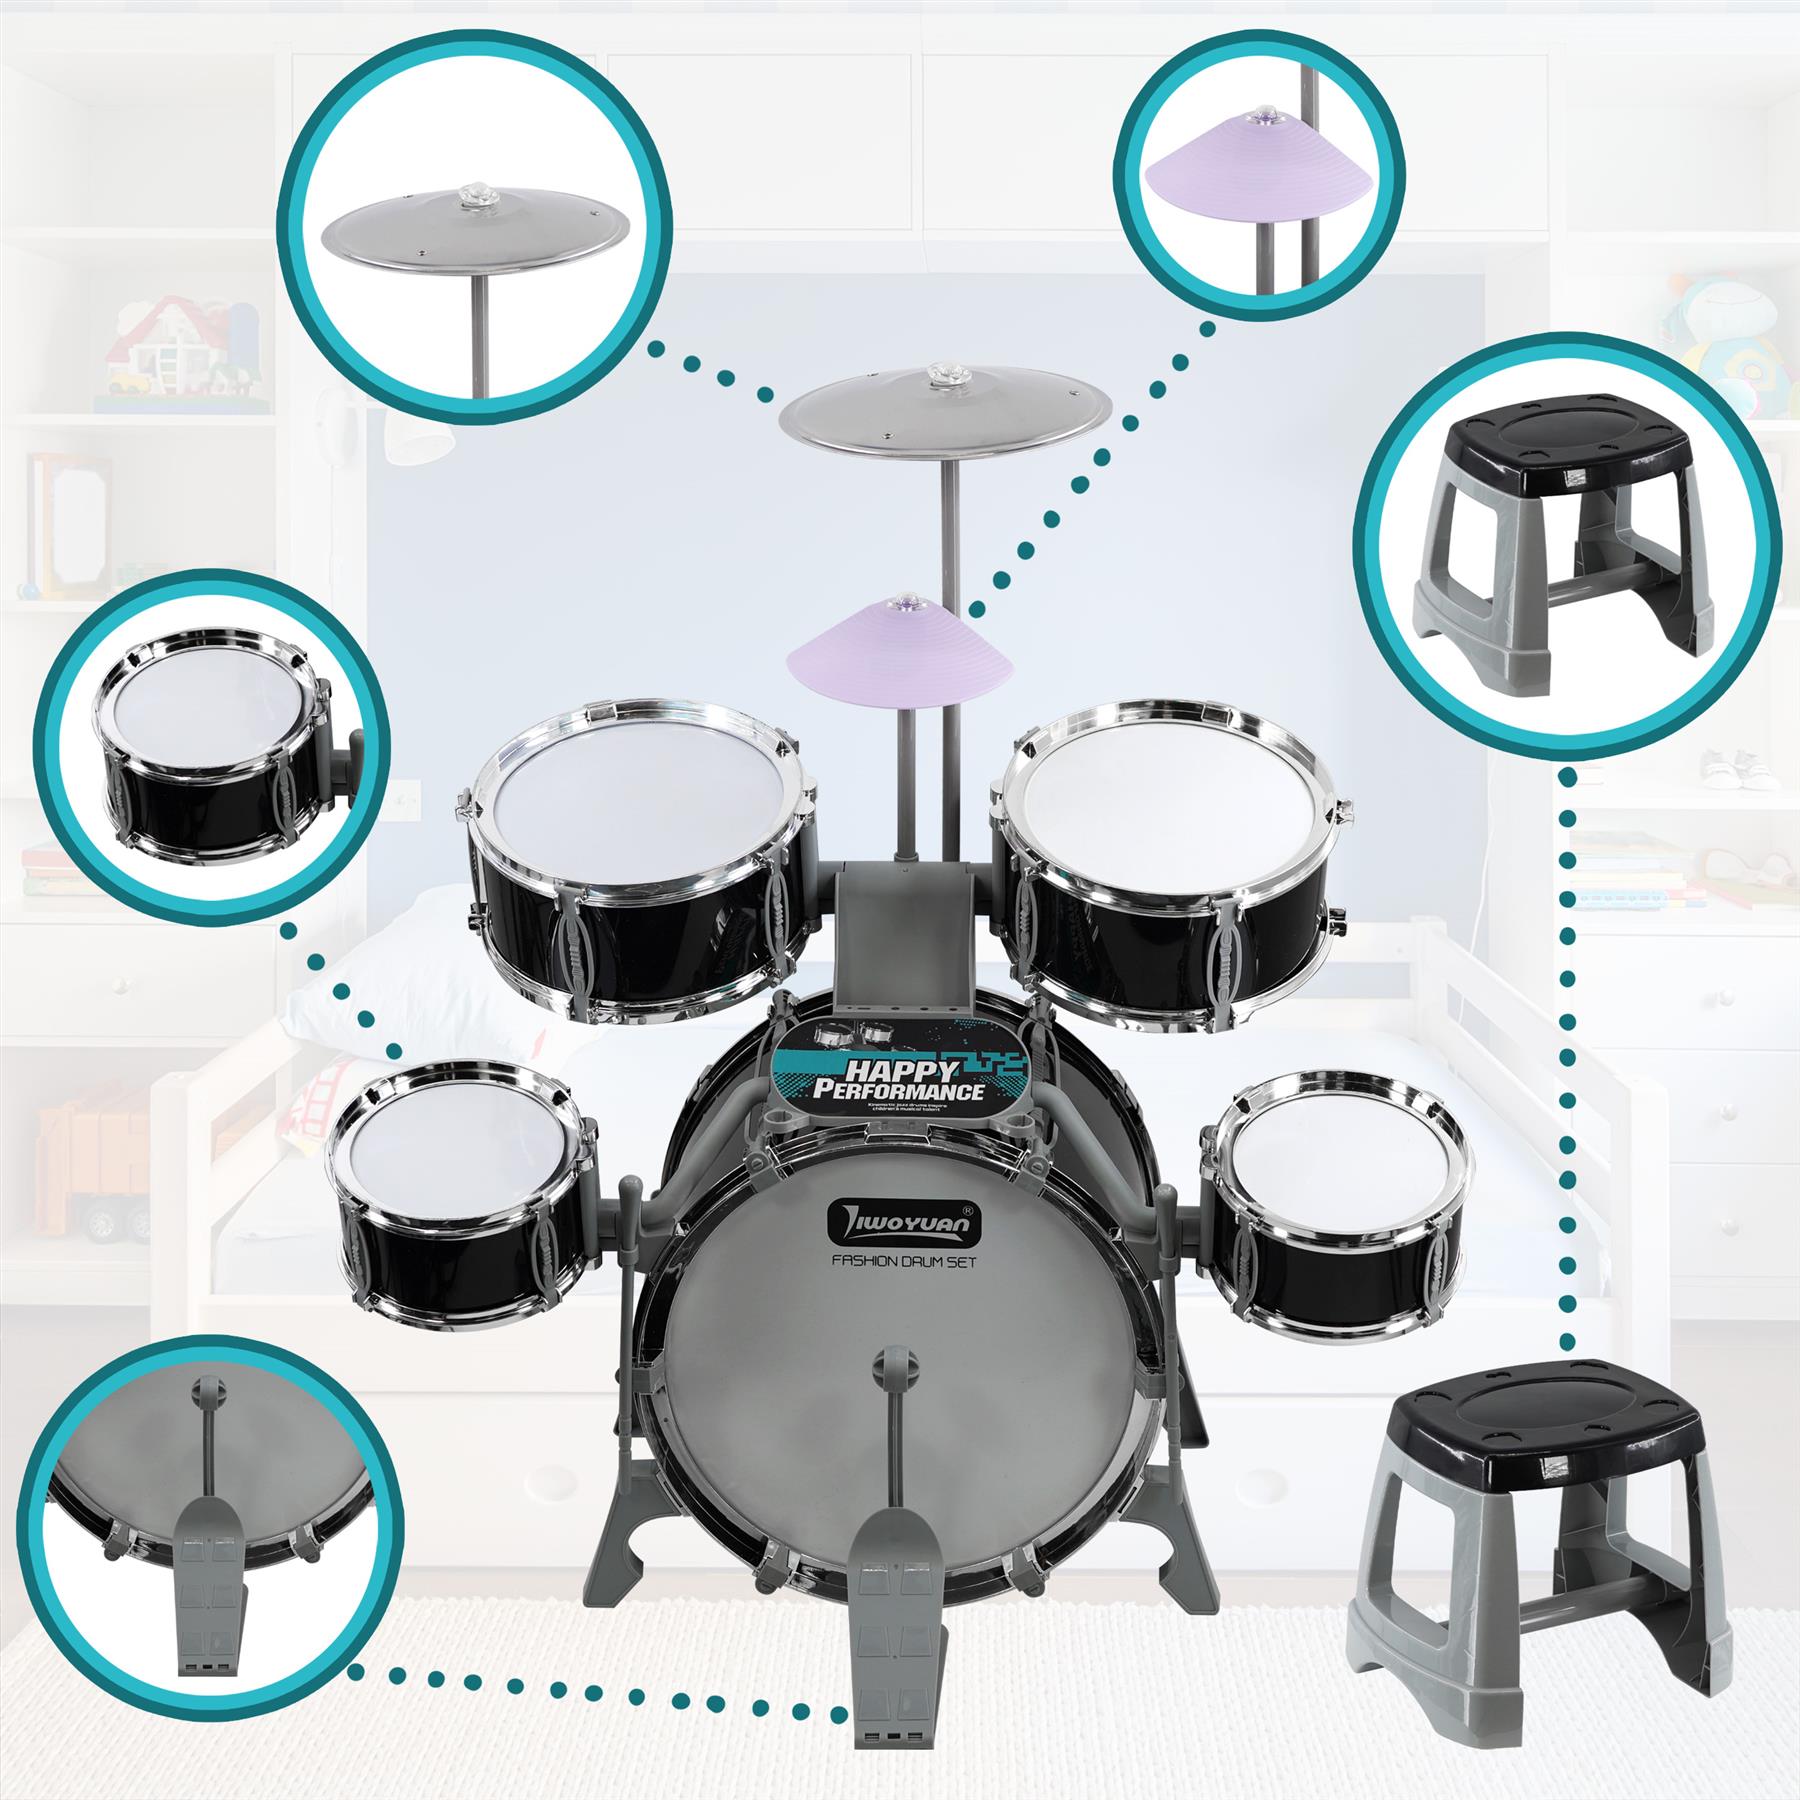 Black Multi functional Kids Jazz Drum Set by The Magic Toy Shop - The Magic Toy Shop